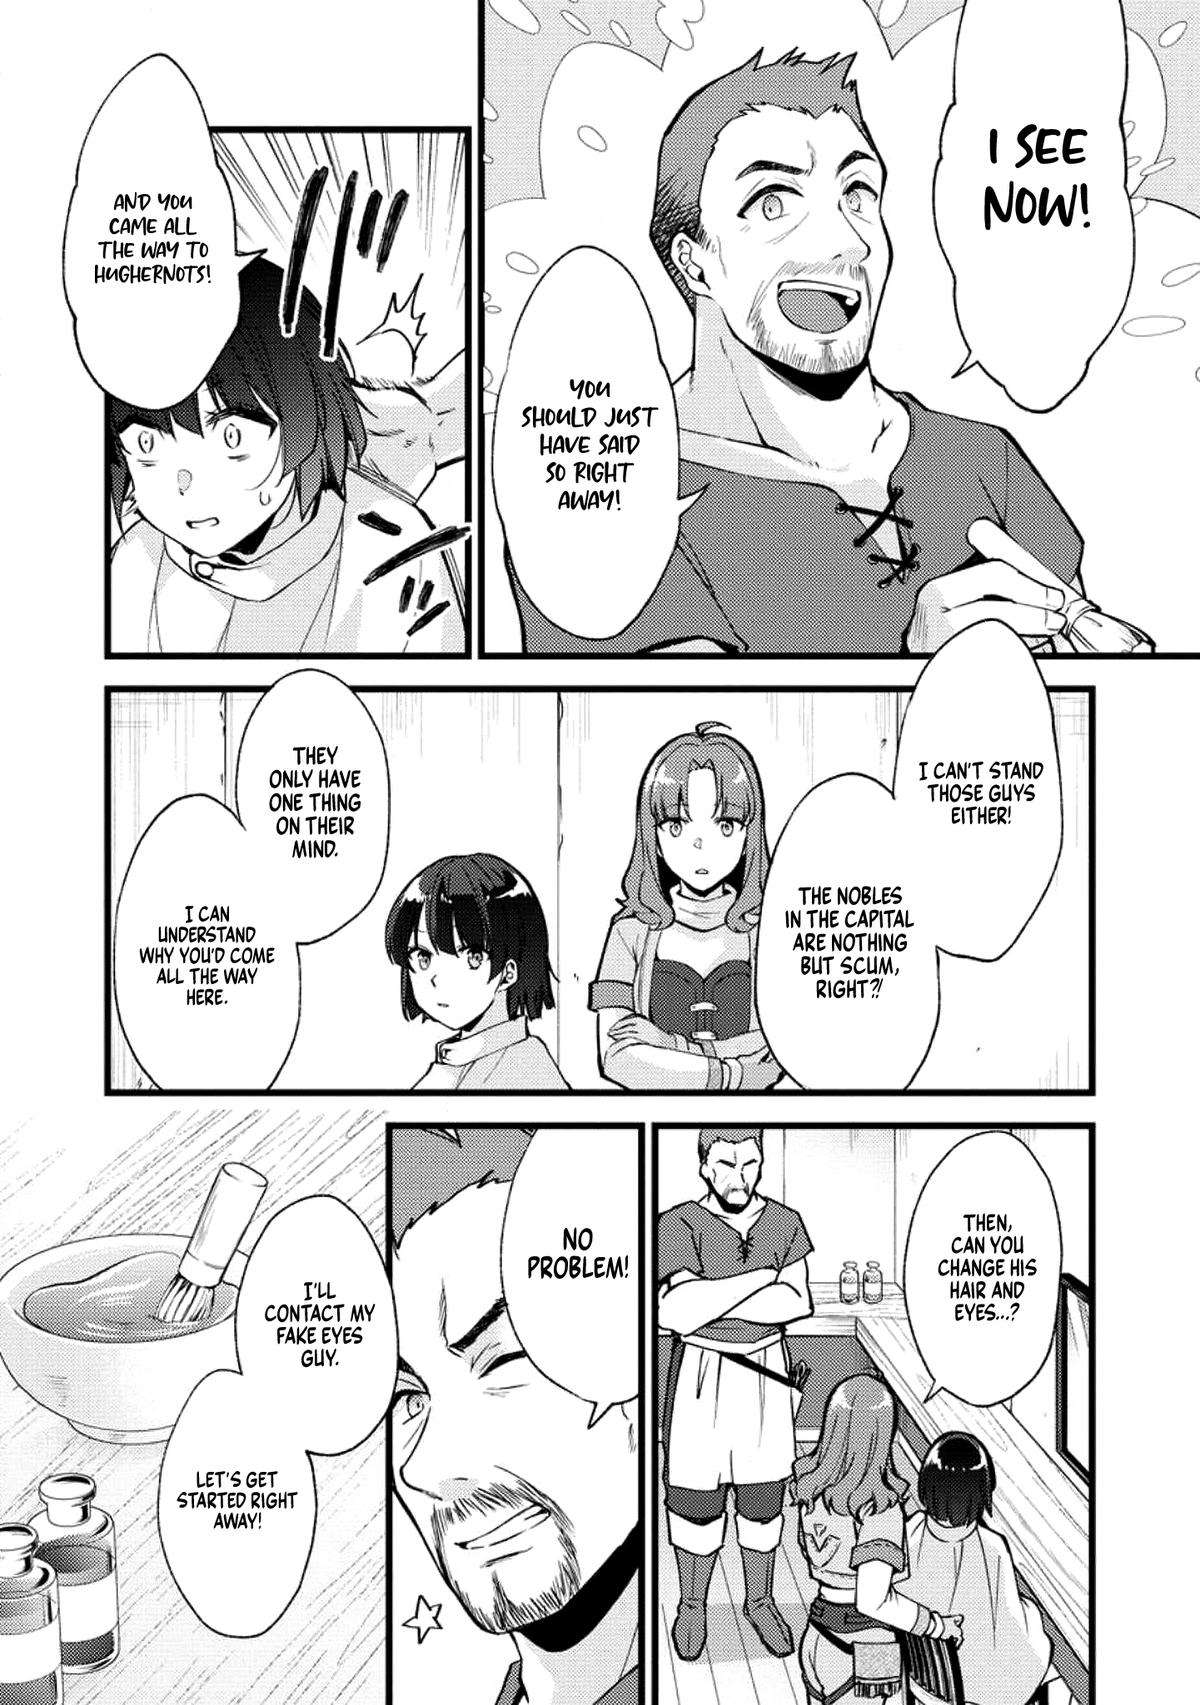 A Sword Master Childhood Friend Power Harassed Me Harshly - chapter 21 - #4